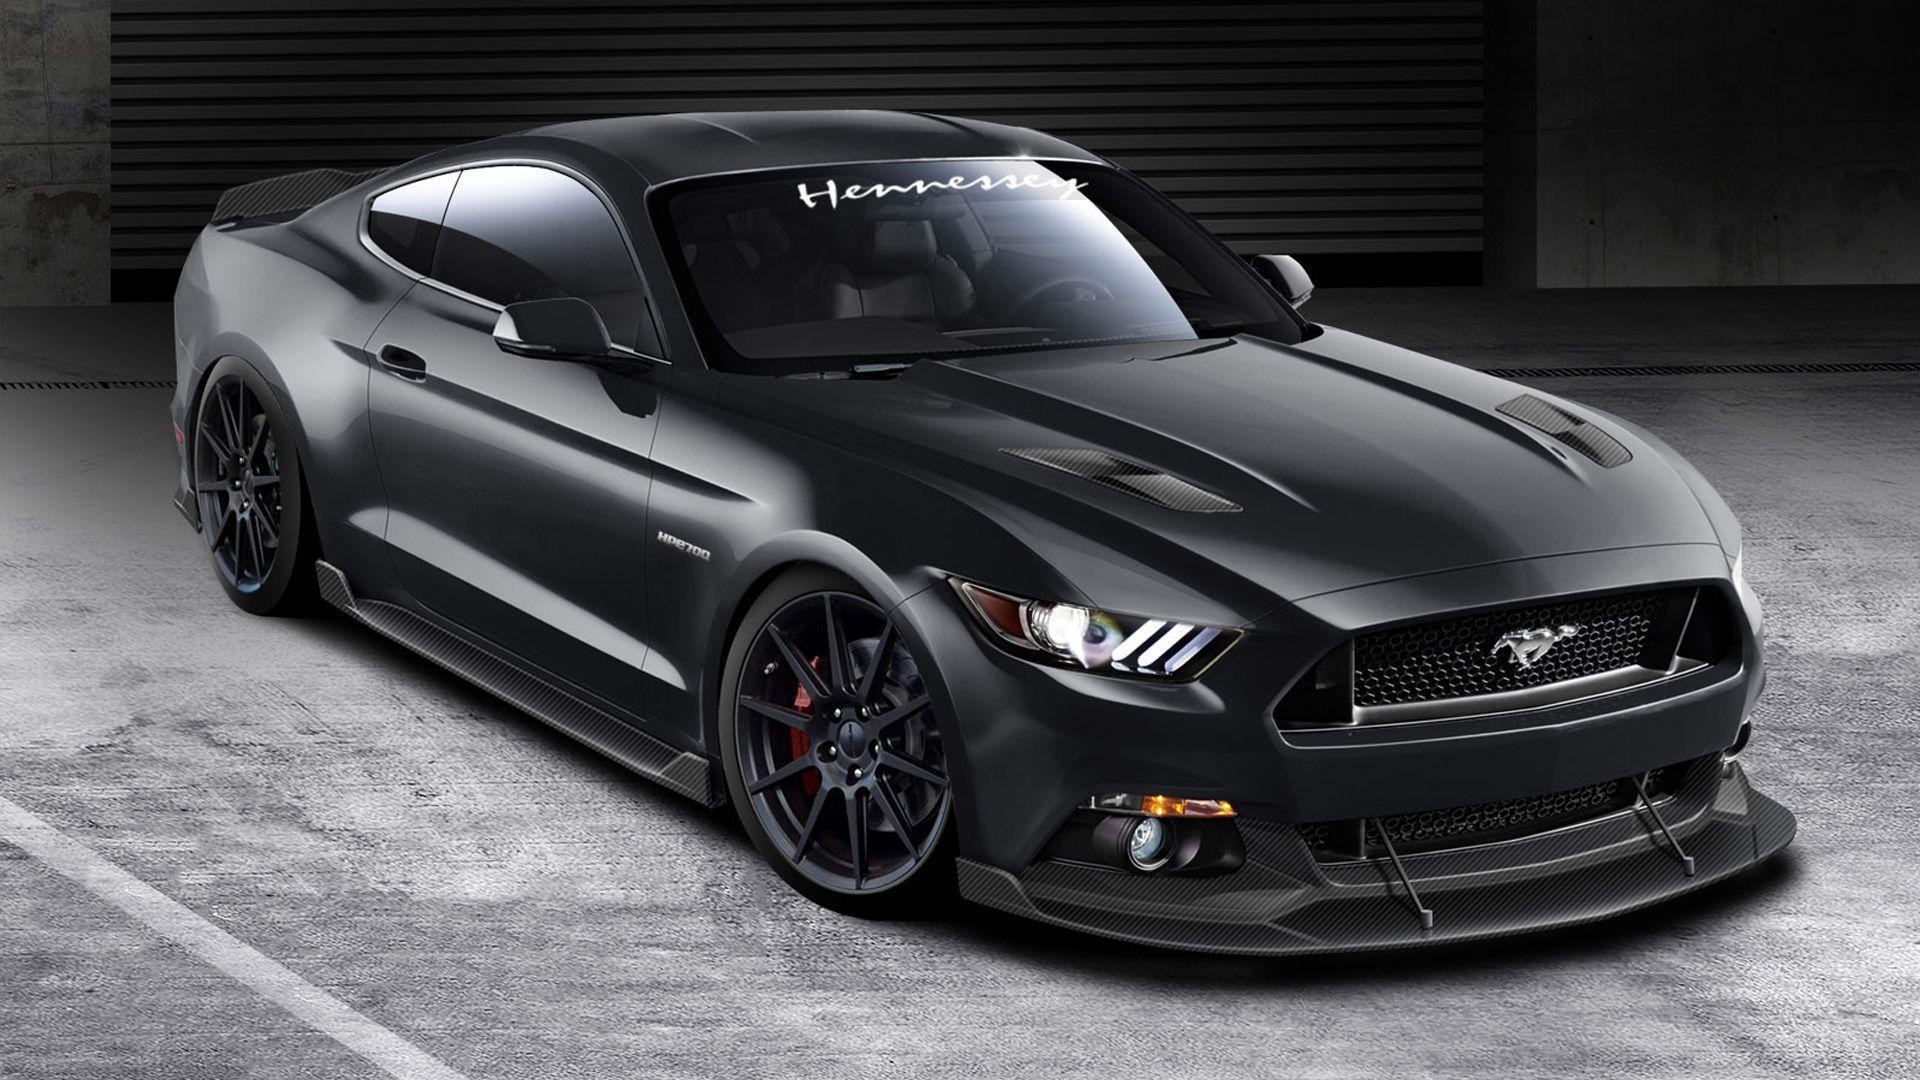 1920x1080 2015 Hennessey Ford Mustang GT Wallpaper | HD Car Wallpapers